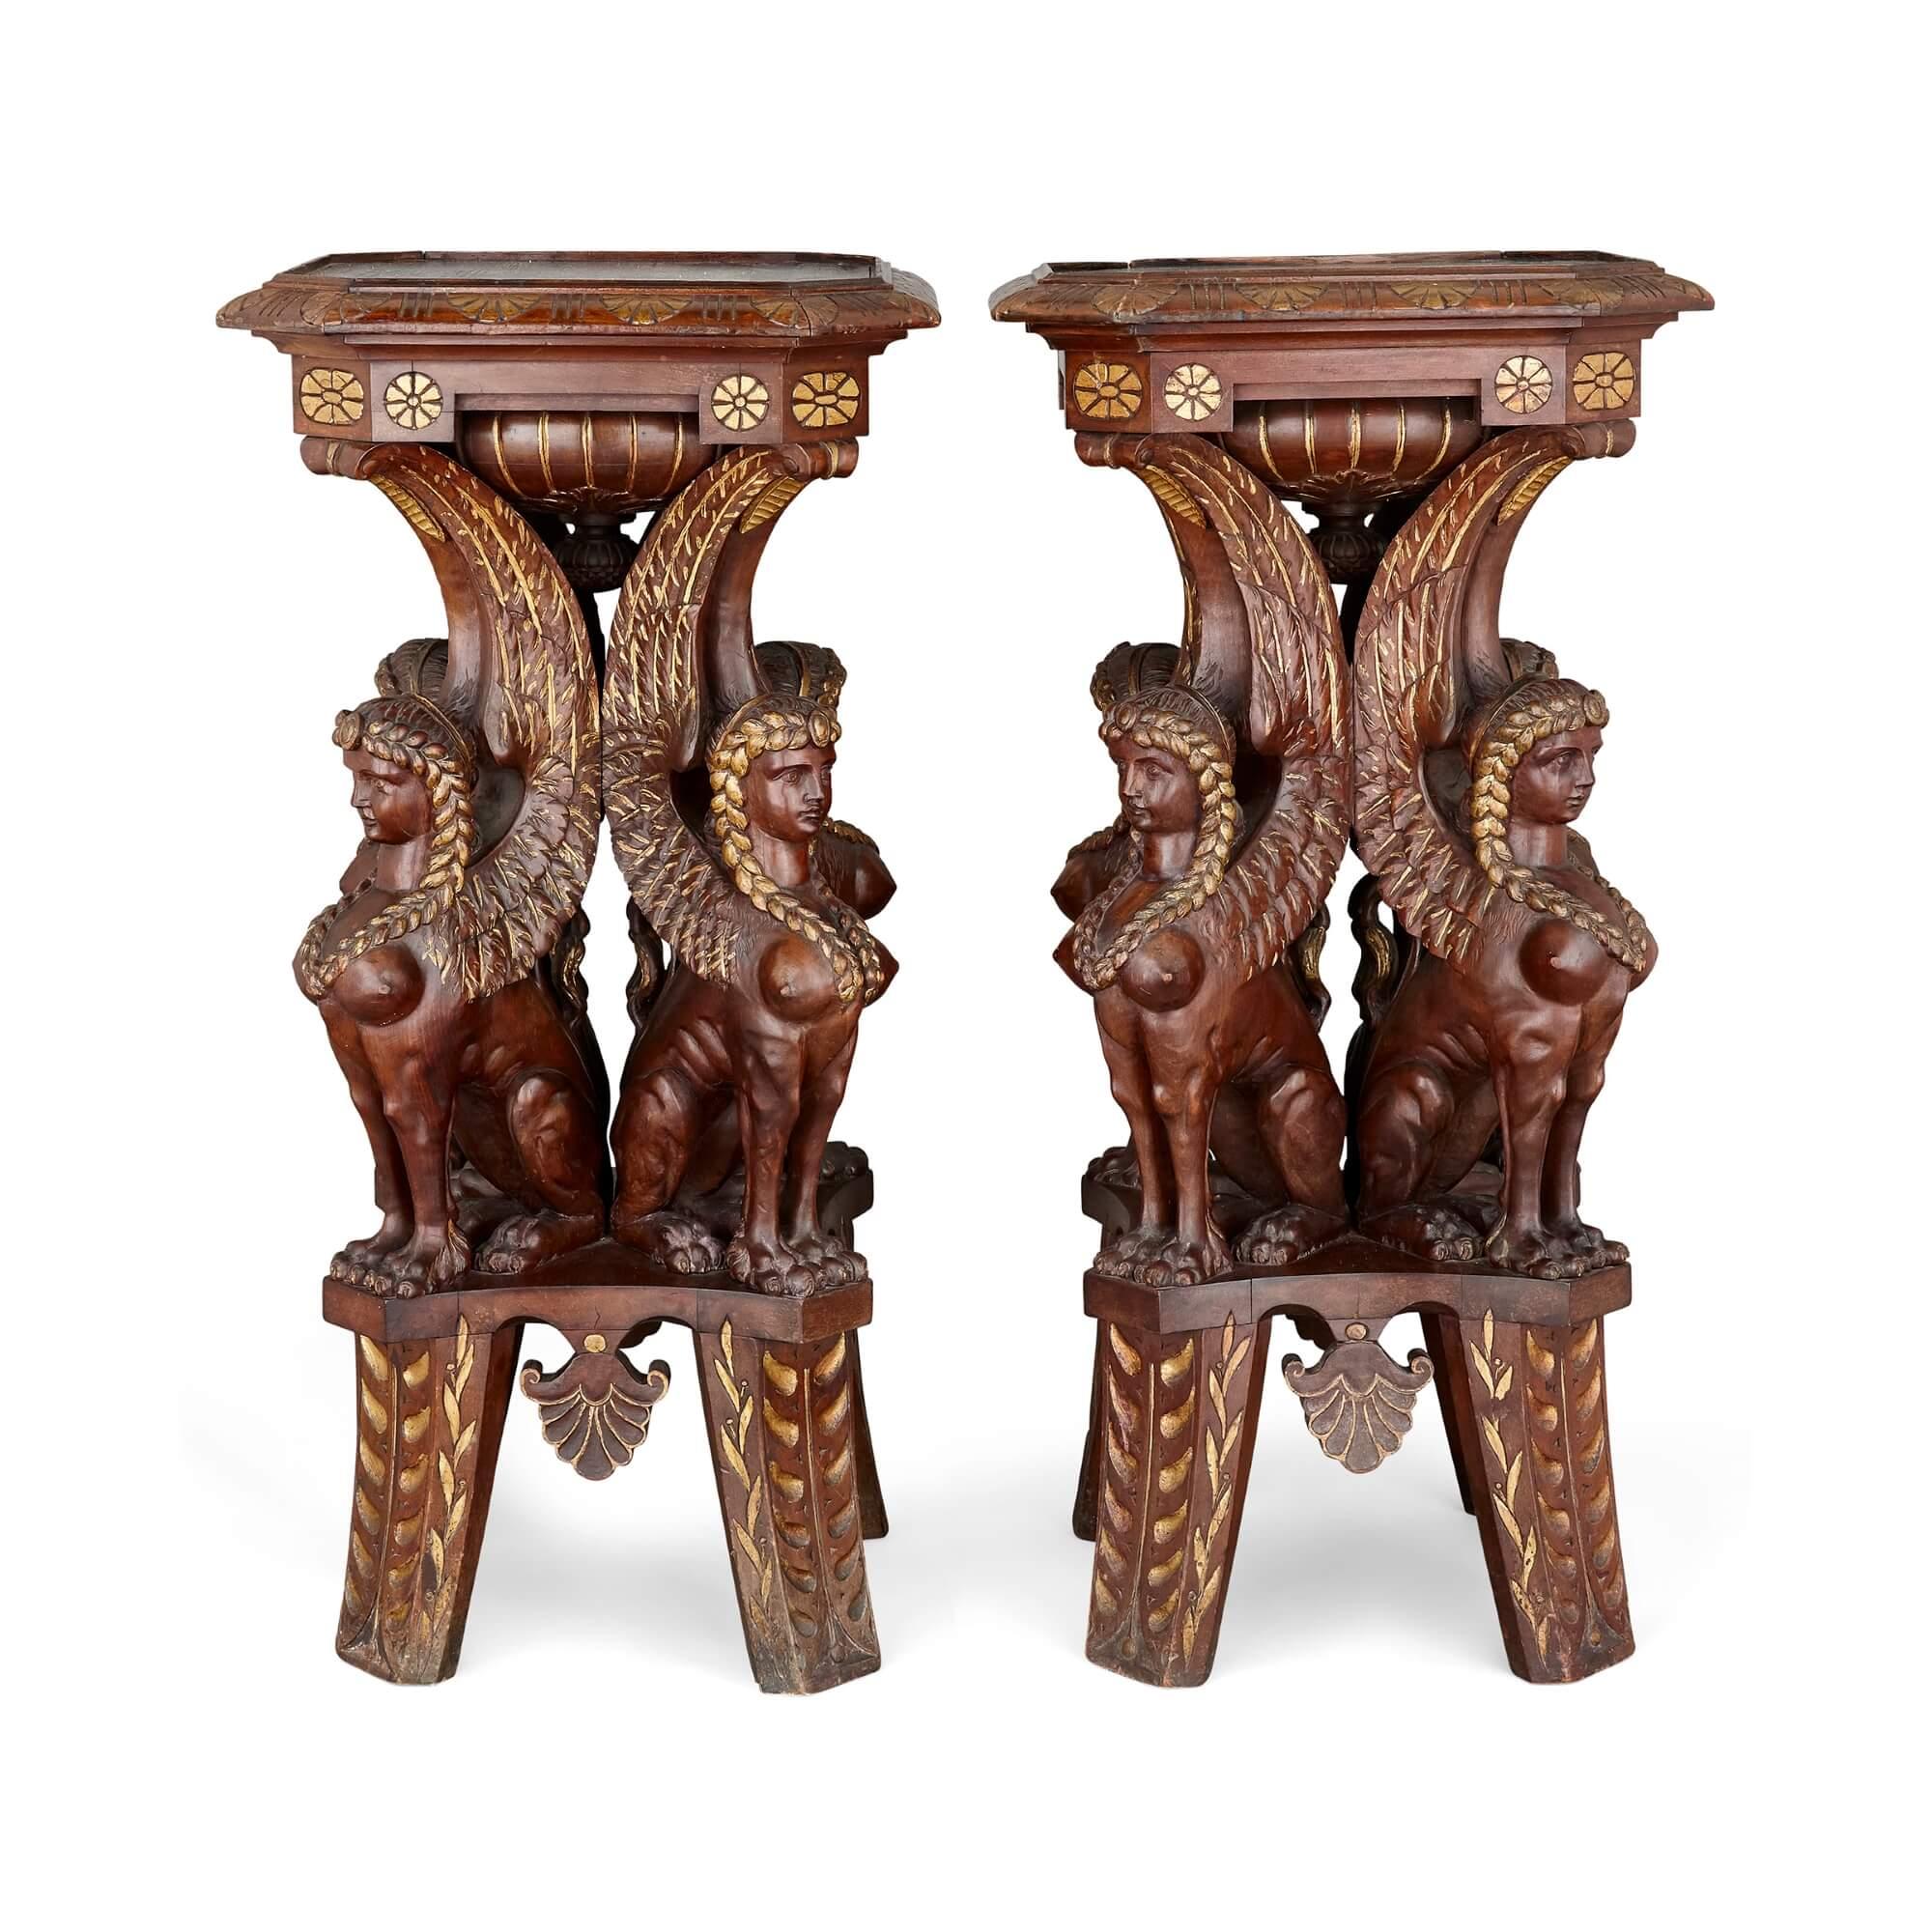 Pair of Egyptian Revival carved and gilt wooden pedestals
French, early 20th Century
Height 105cm, width 52cm, depth 51cm

This eccentric pair of pedestals is crafted in the Egyptian Revival style. Each pedestal features four legs modelled as seated